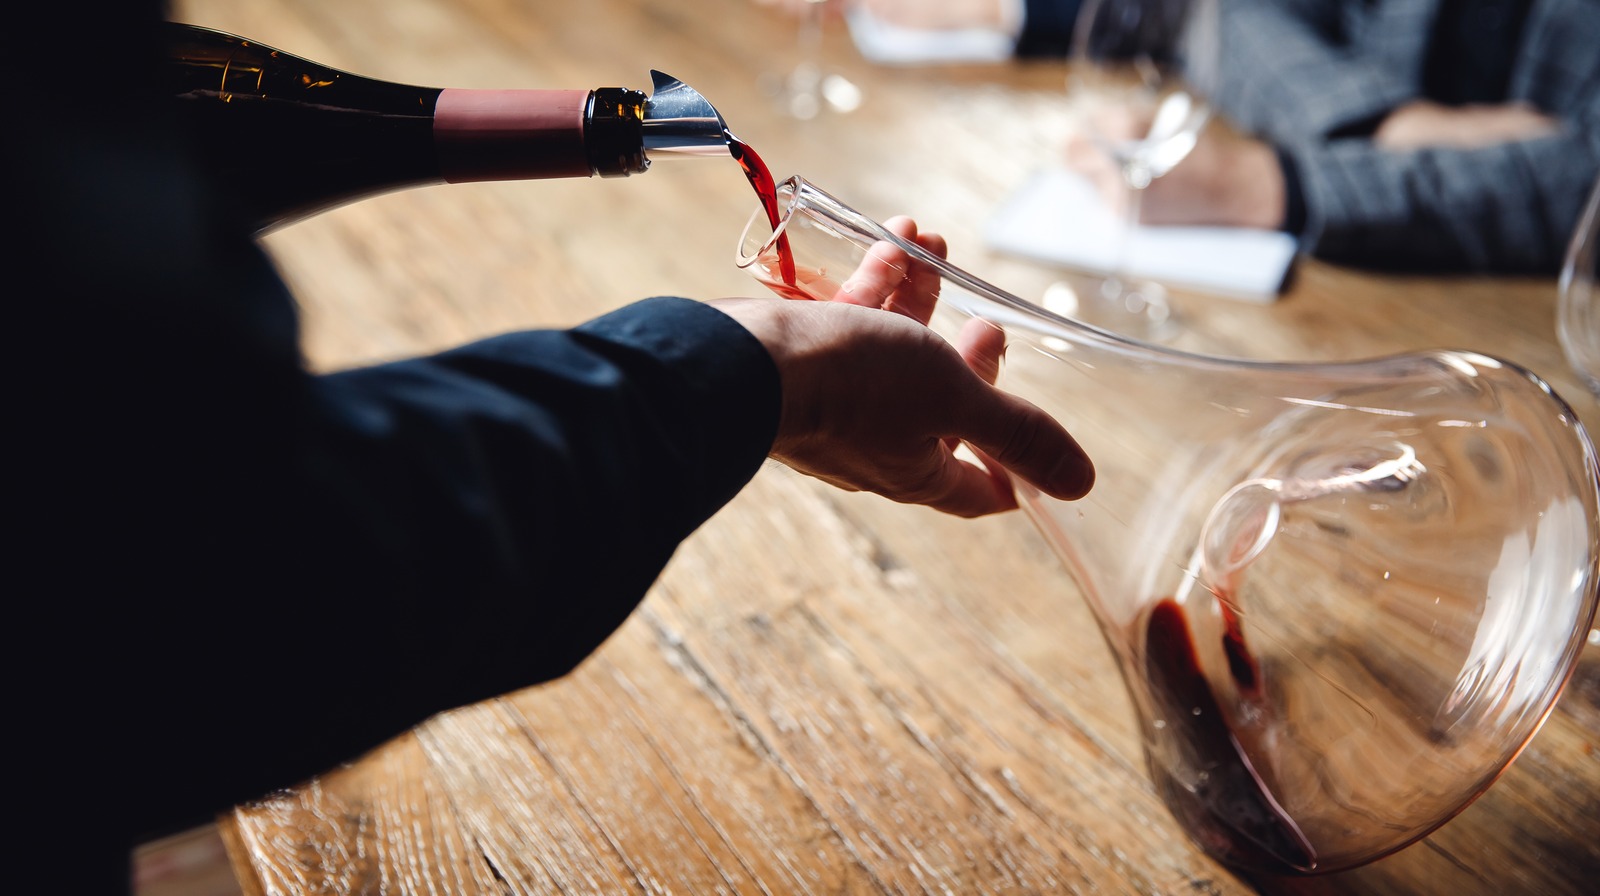 https://www.thedailymeal.com/img/gallery/the-dos-and-donts-of-decanting-wine/l-intro-1670357506.jpg